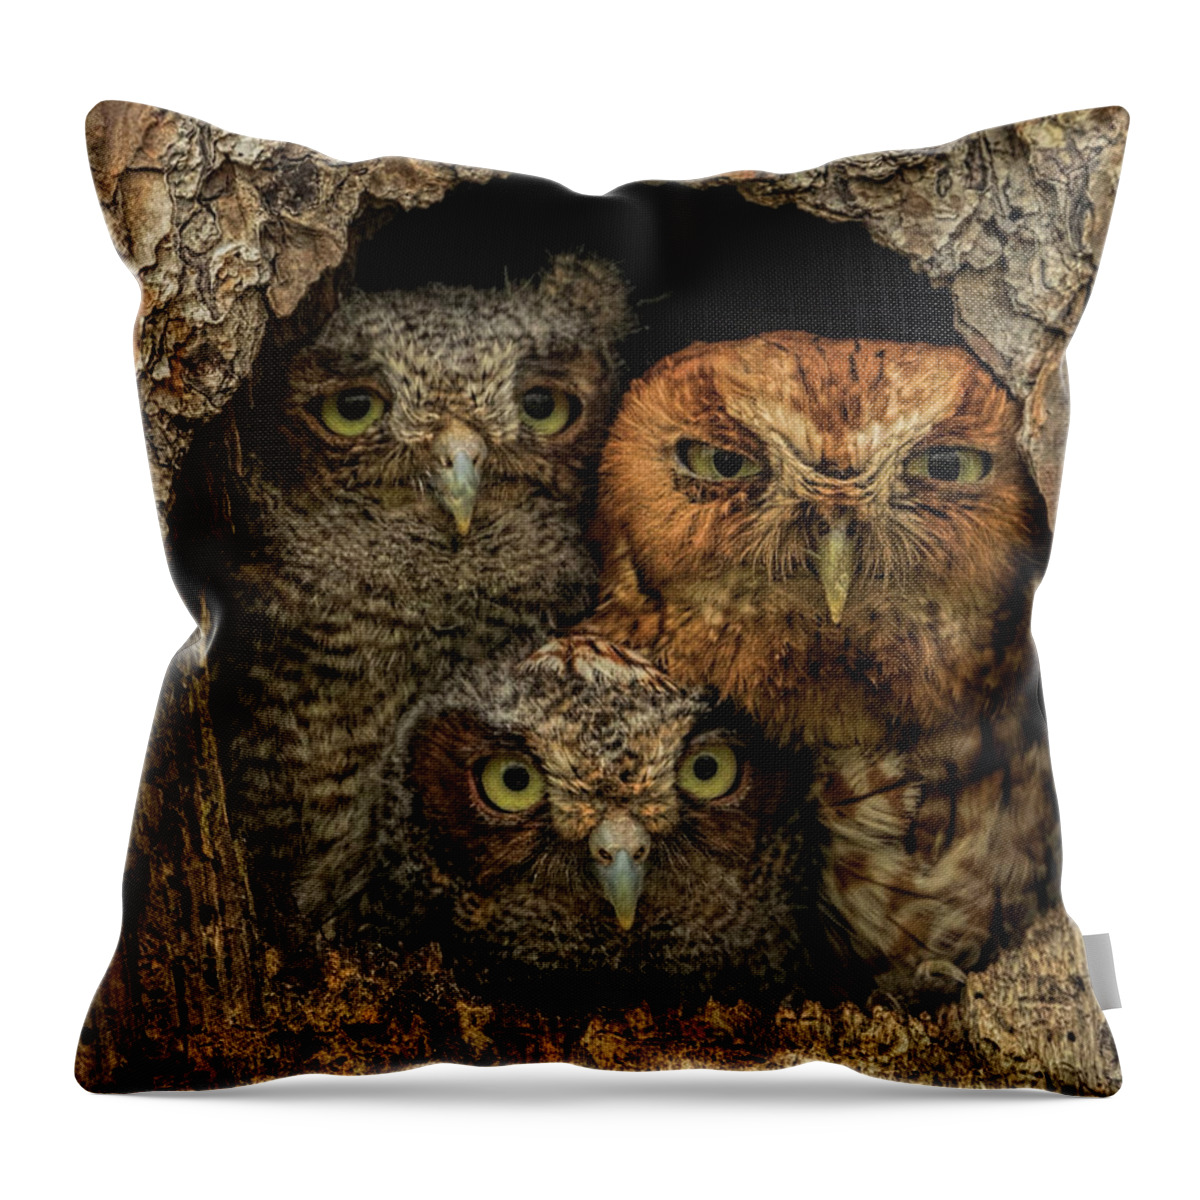 Easternscreechowl Throw Pillow featuring the photograph Screech Owl Family by Justin Battles